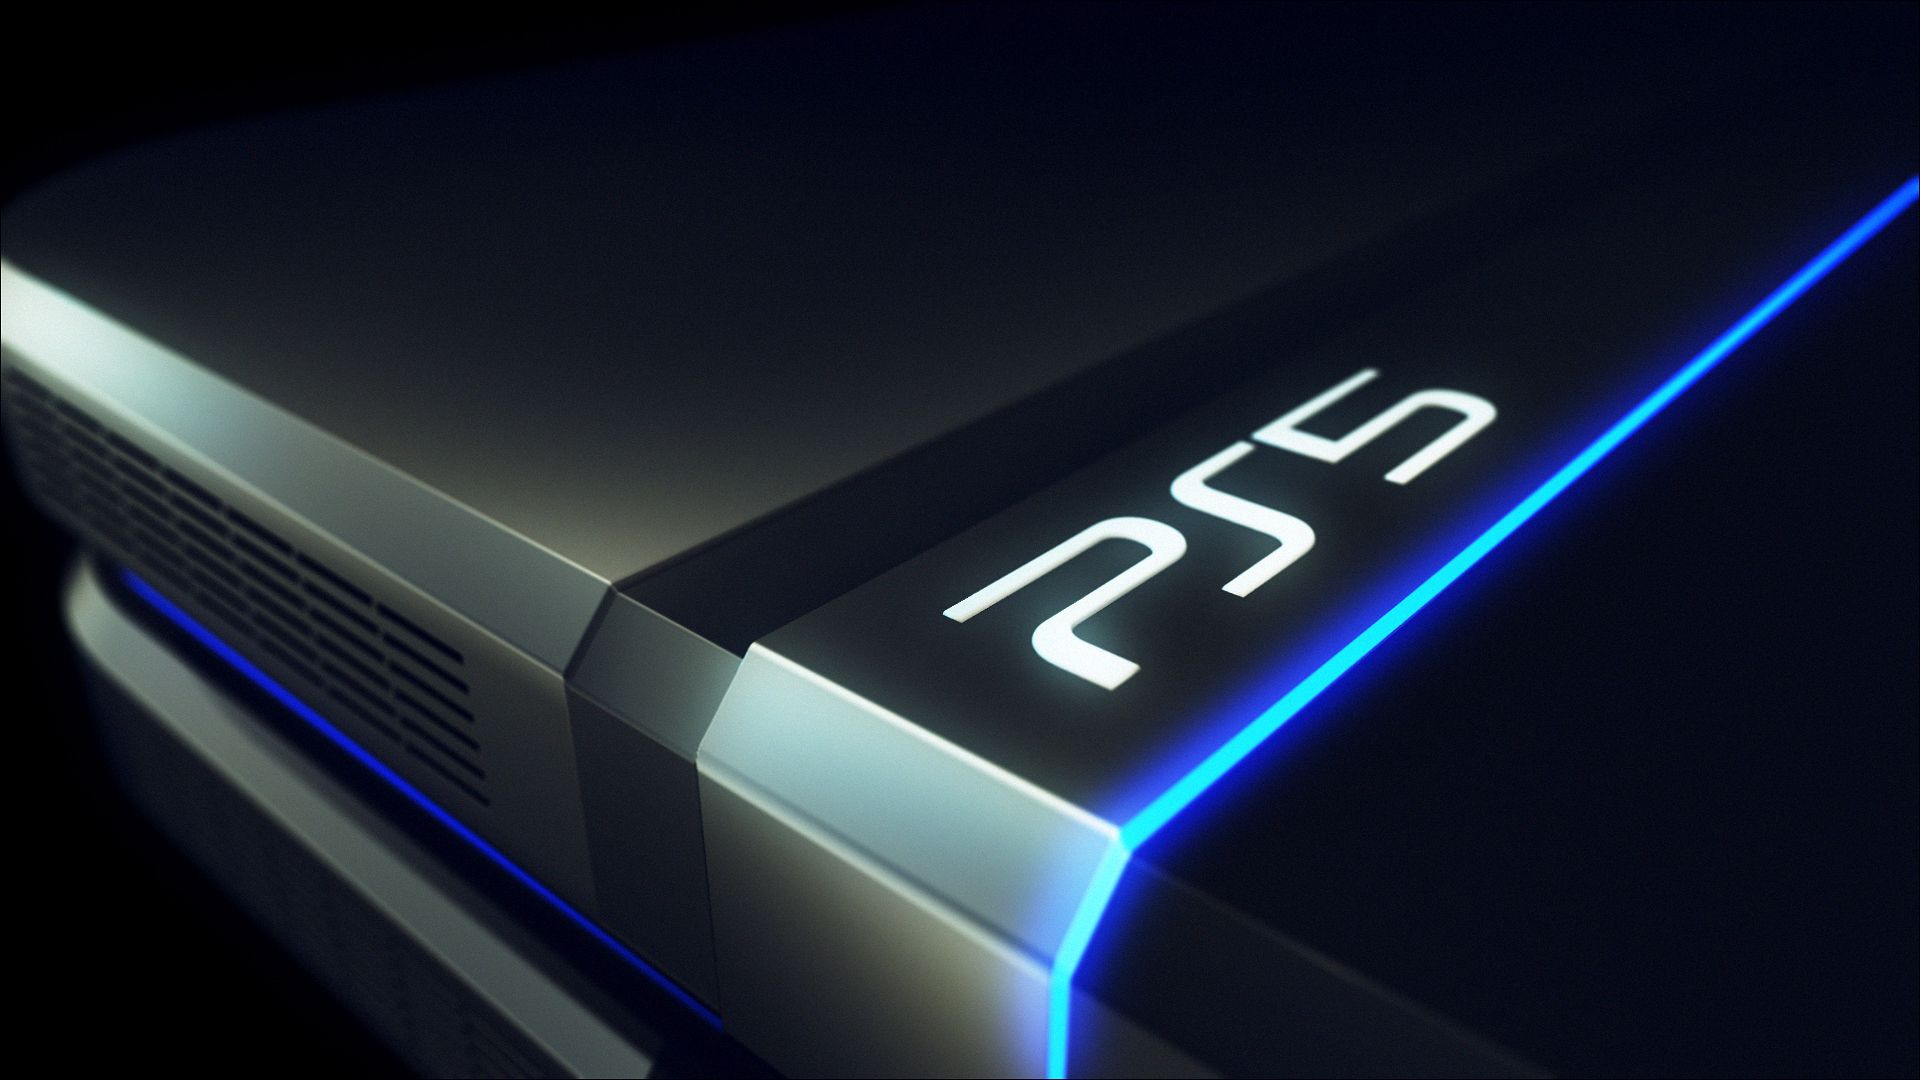 More DualShock - leak, alongside another look at that PS5